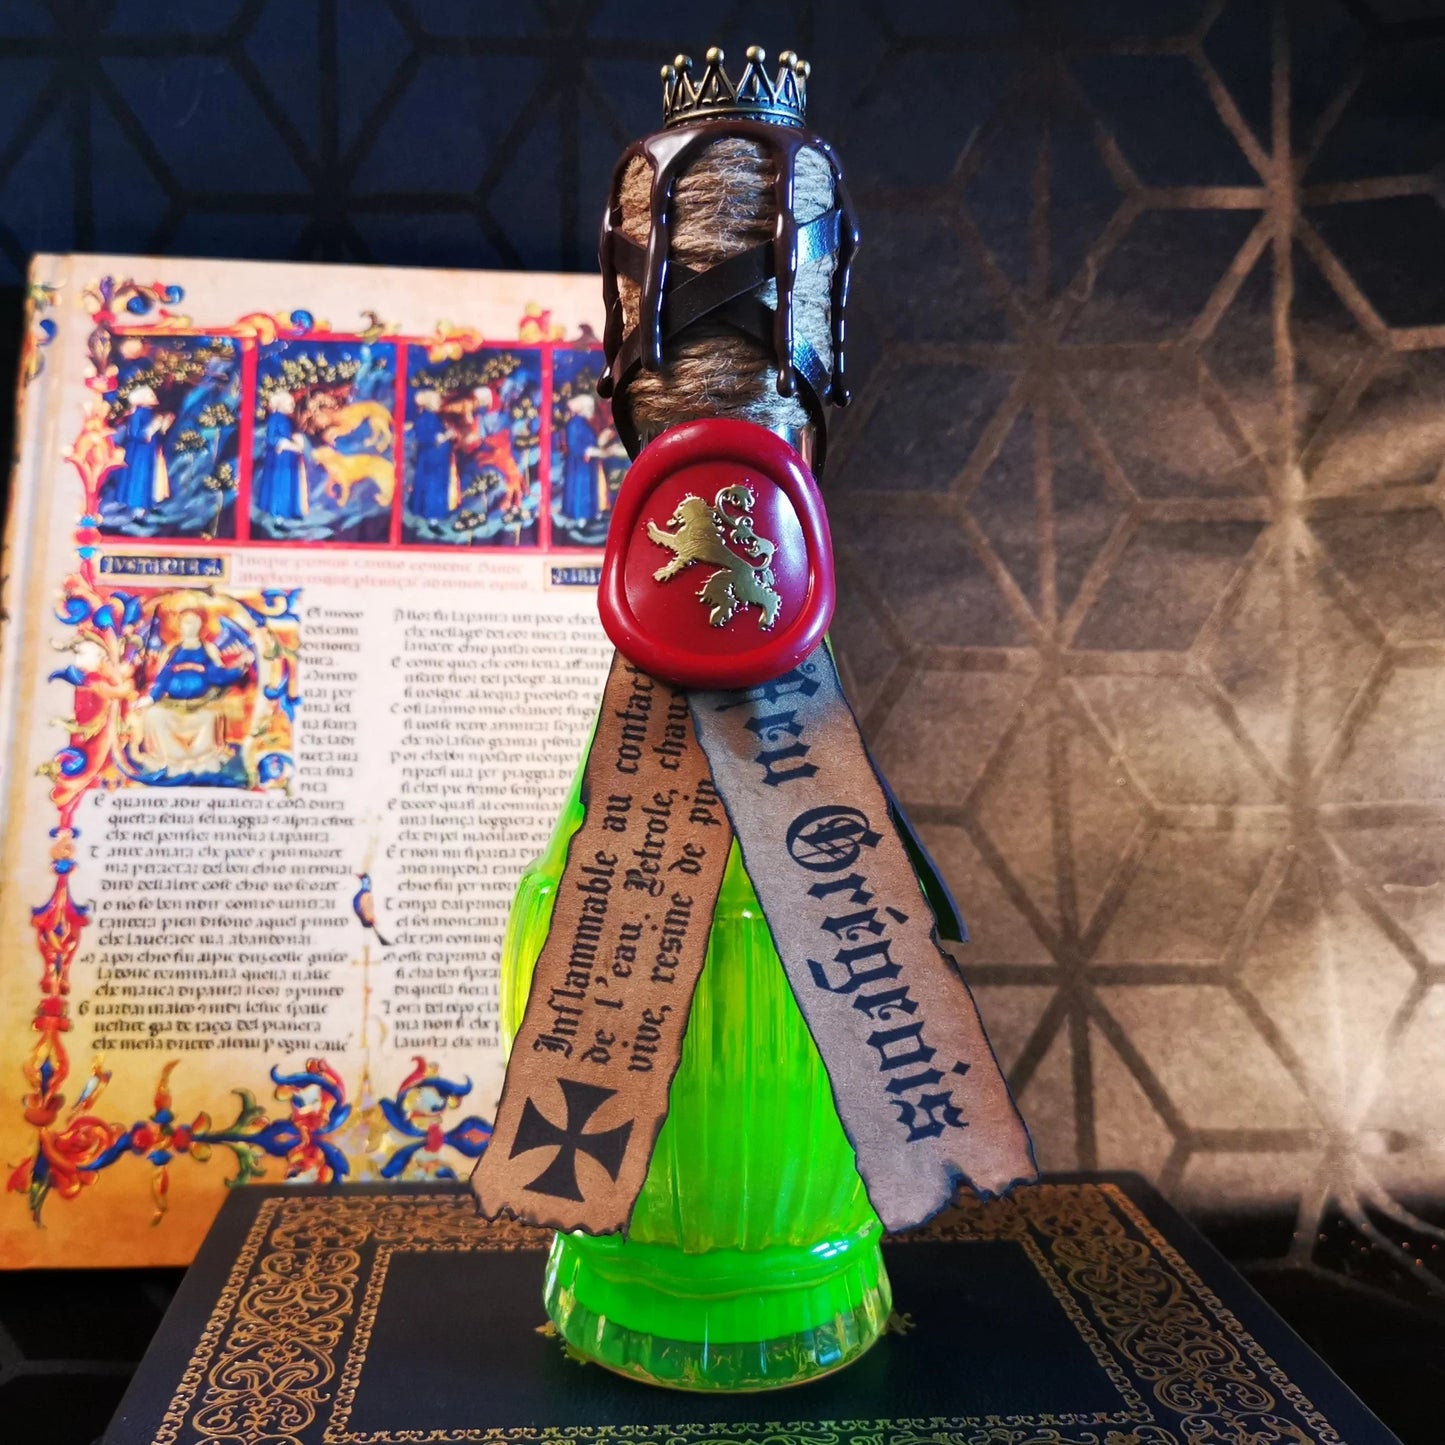 Feu Gregeois Aravis Potions Apothecary Harry Potter